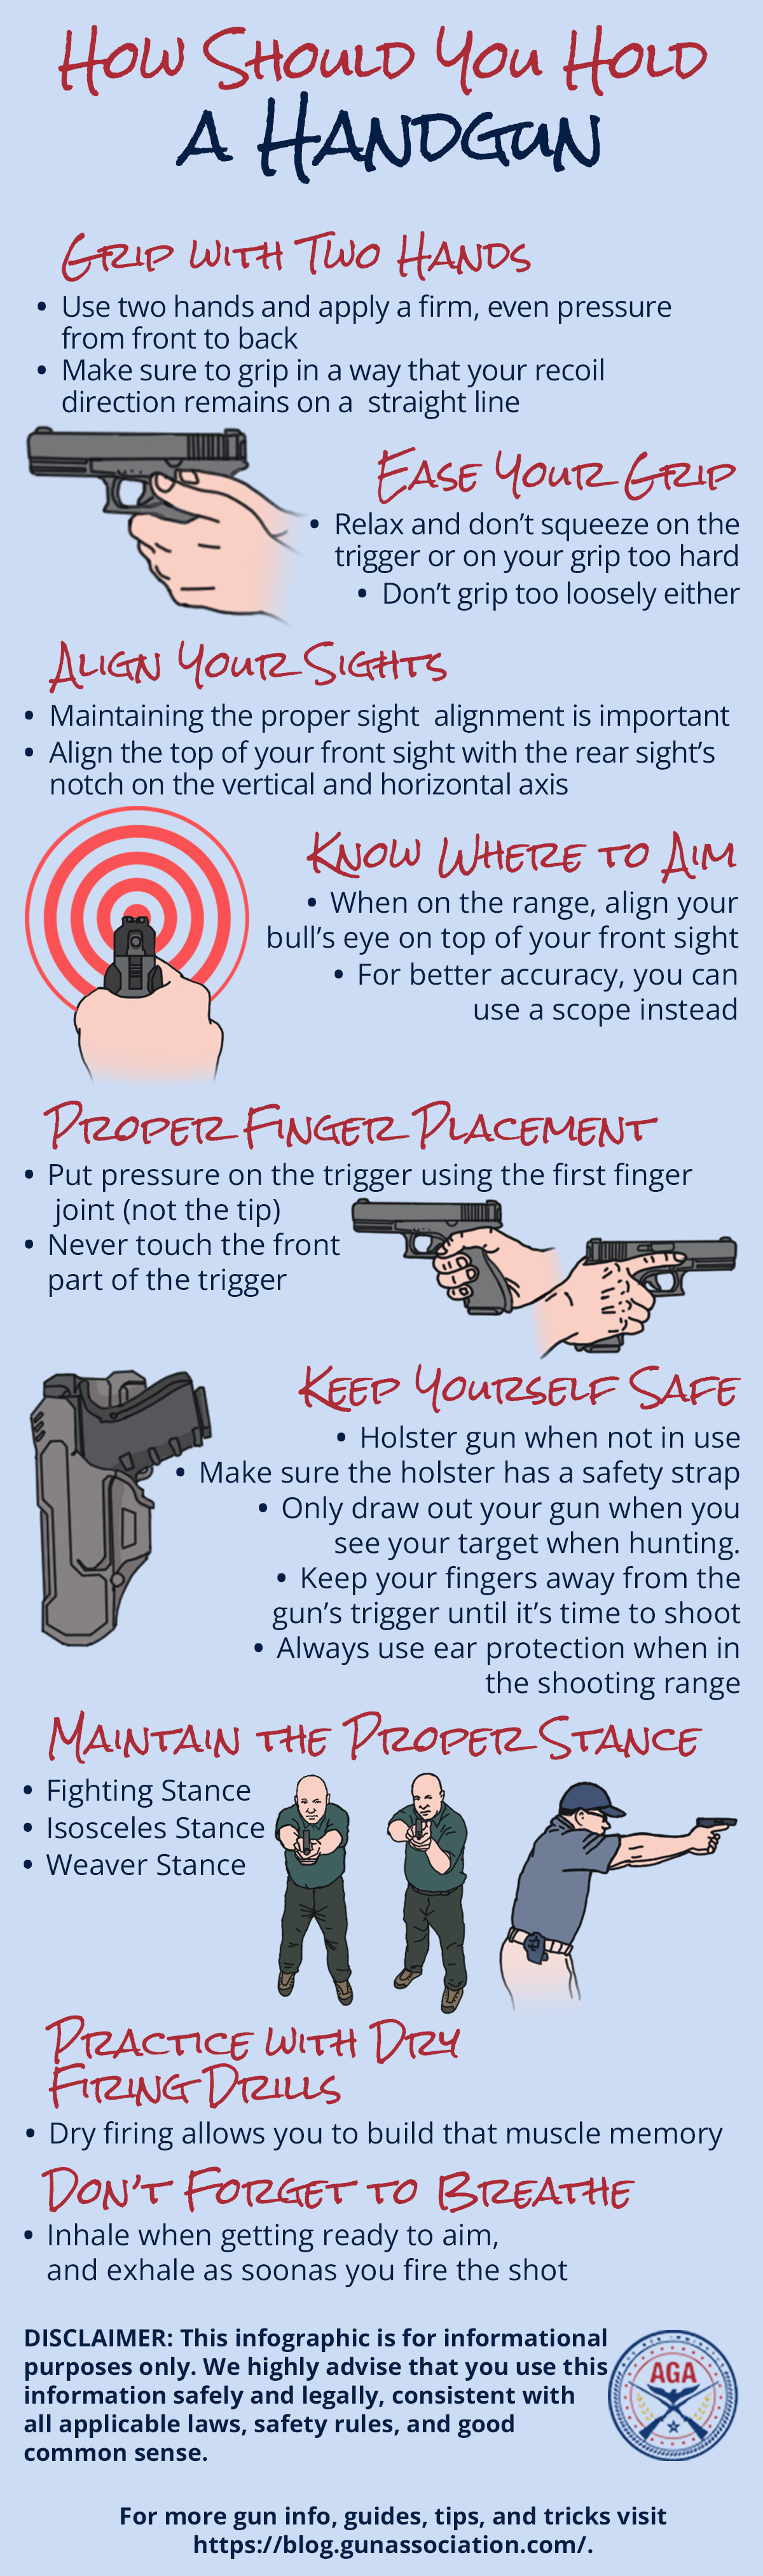 How Should You Hold a Handgun